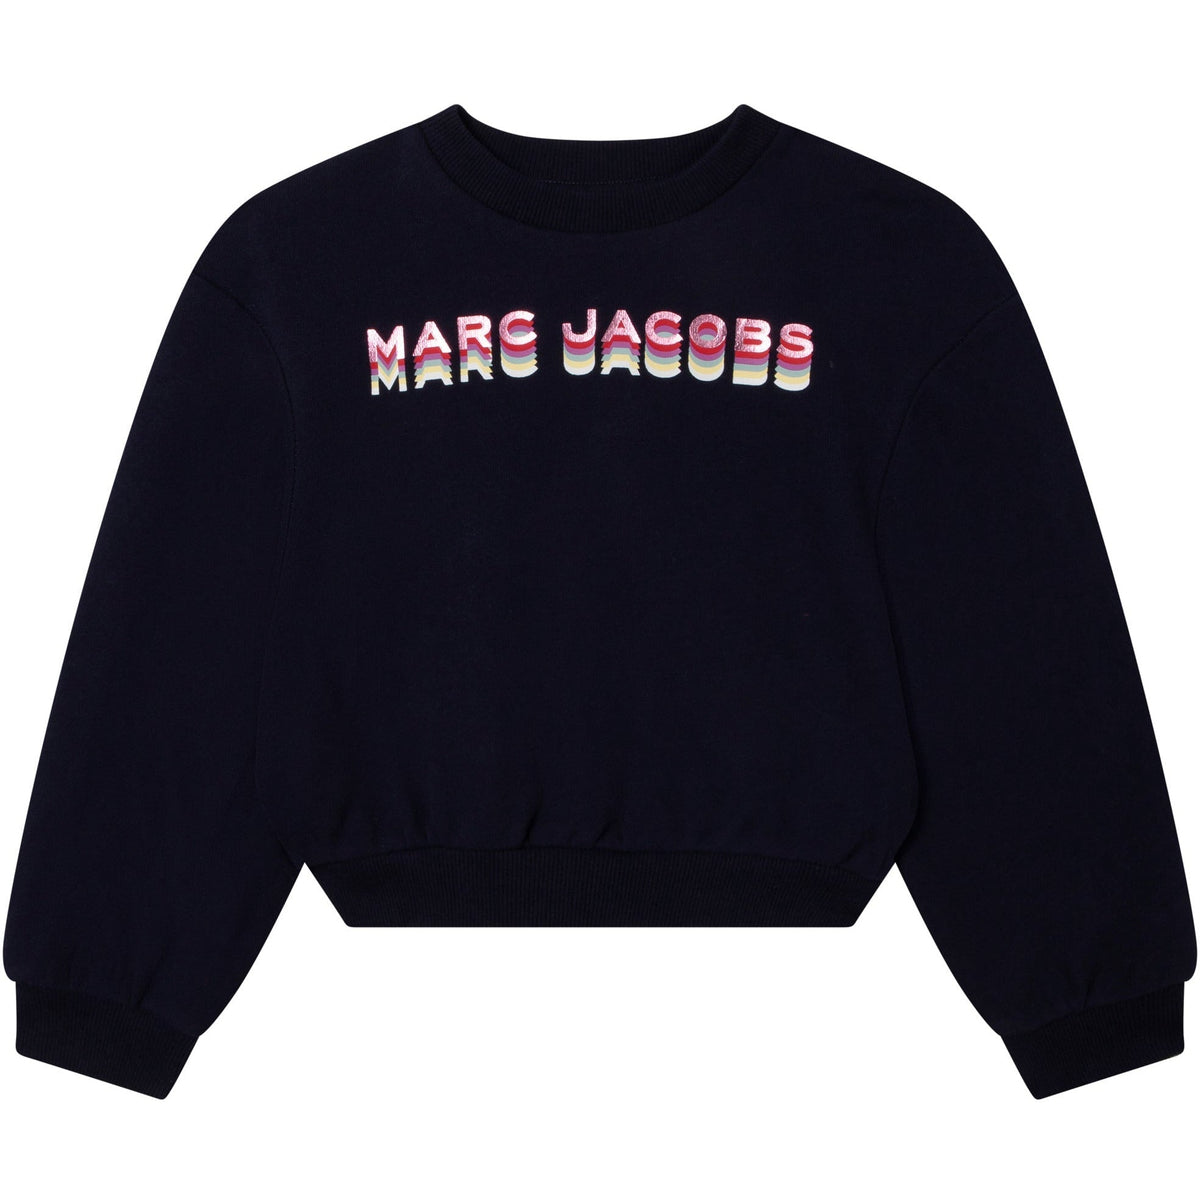 Cropped Sweatshirt With Print - Navy